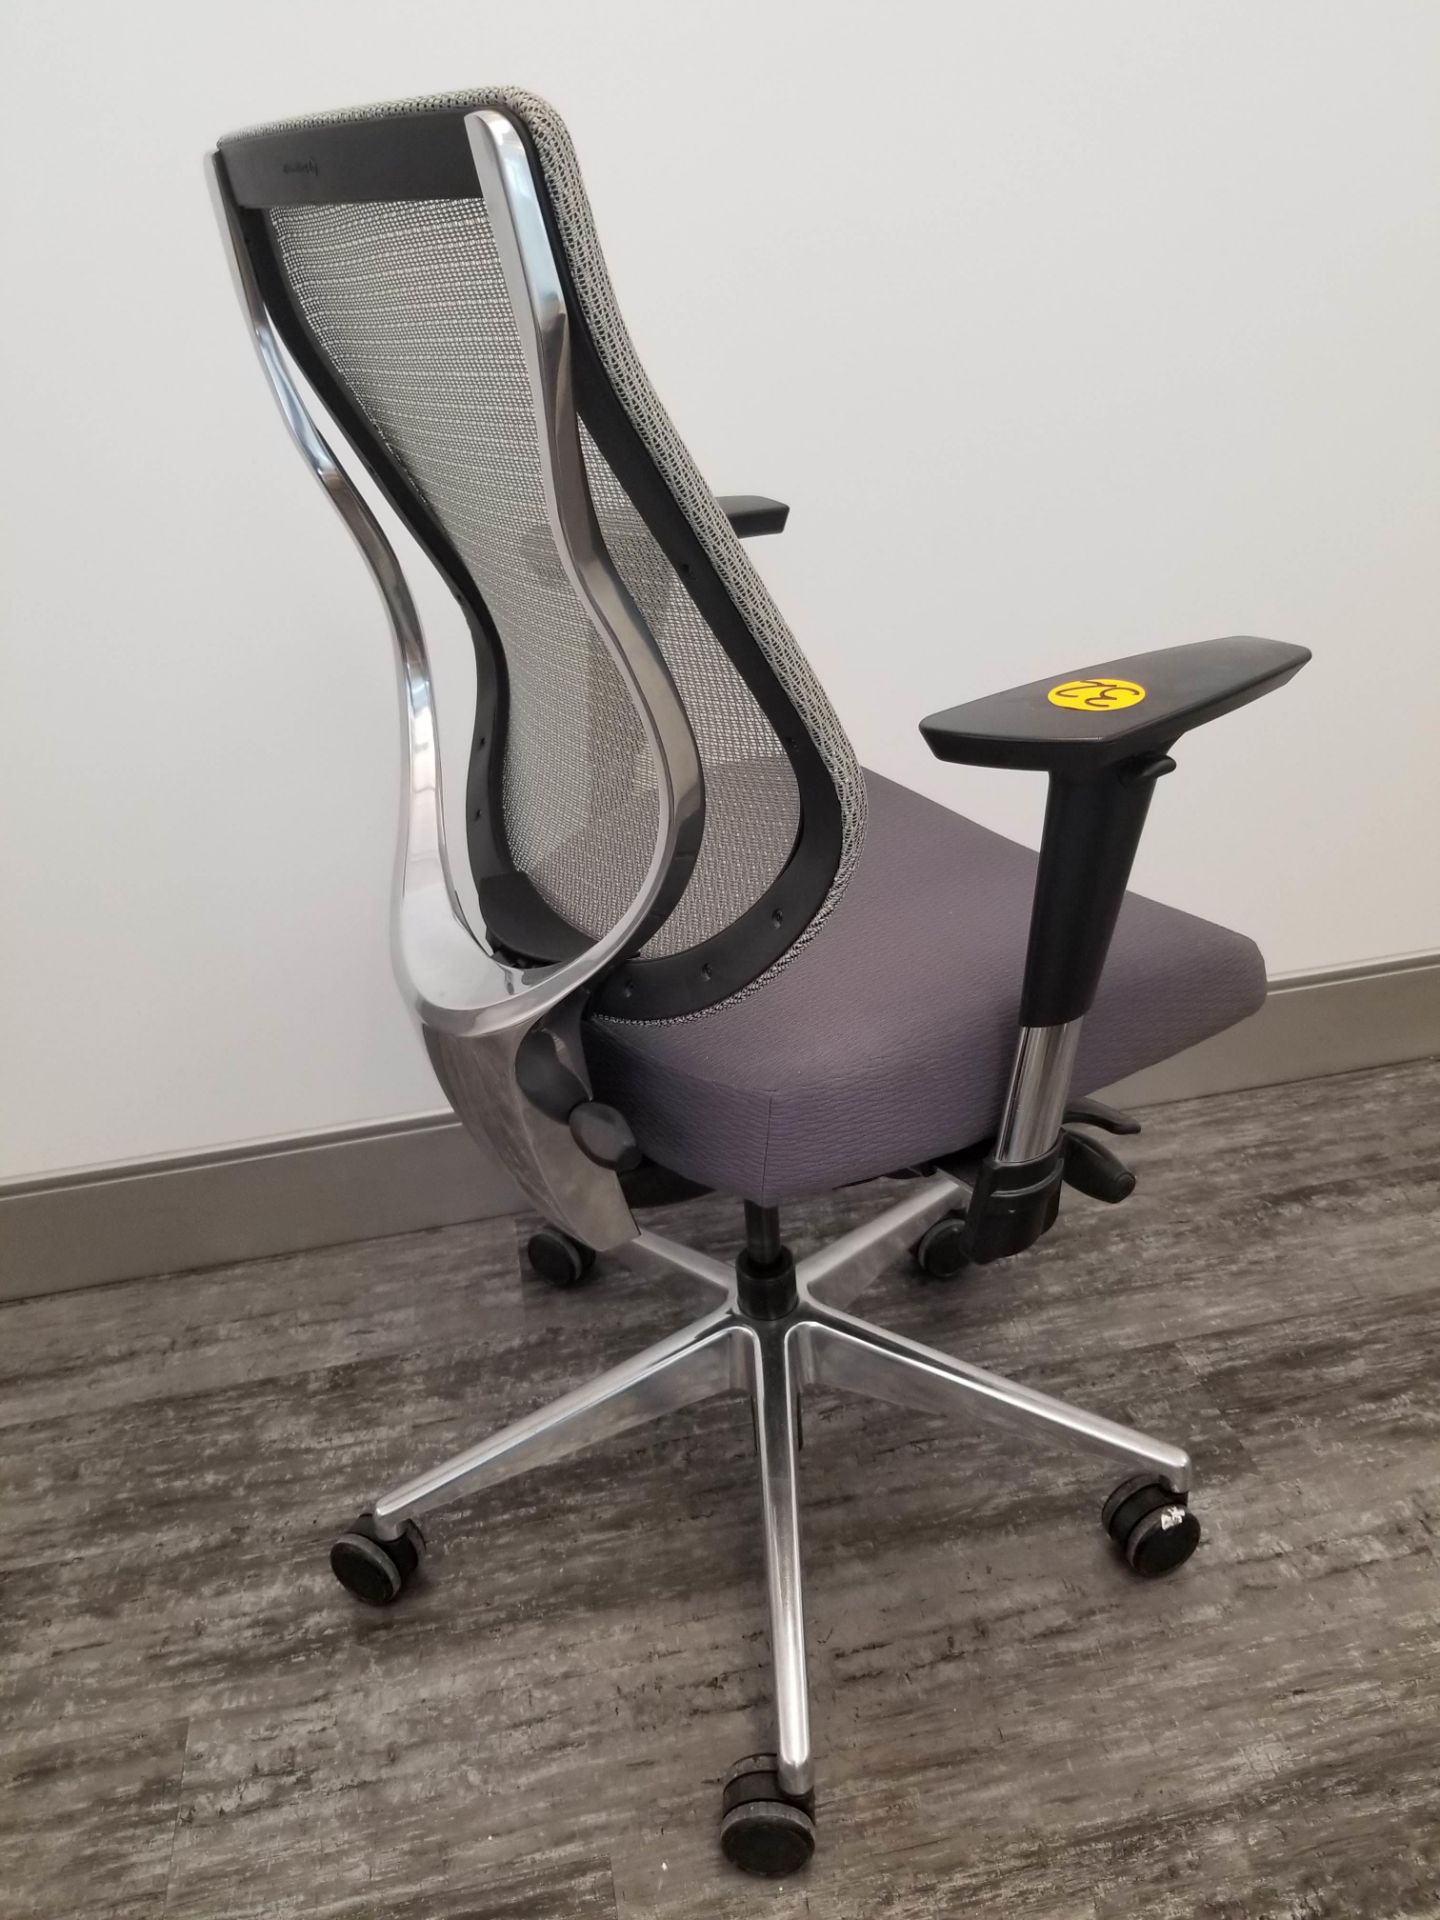 ALLSEATING - EXEC. CHAIR ON CASTERS, GREY W/ MESH BACK, ADJUSTABLE HEIGHT, ADJUSTABLE ARMS - Image 2 of 7